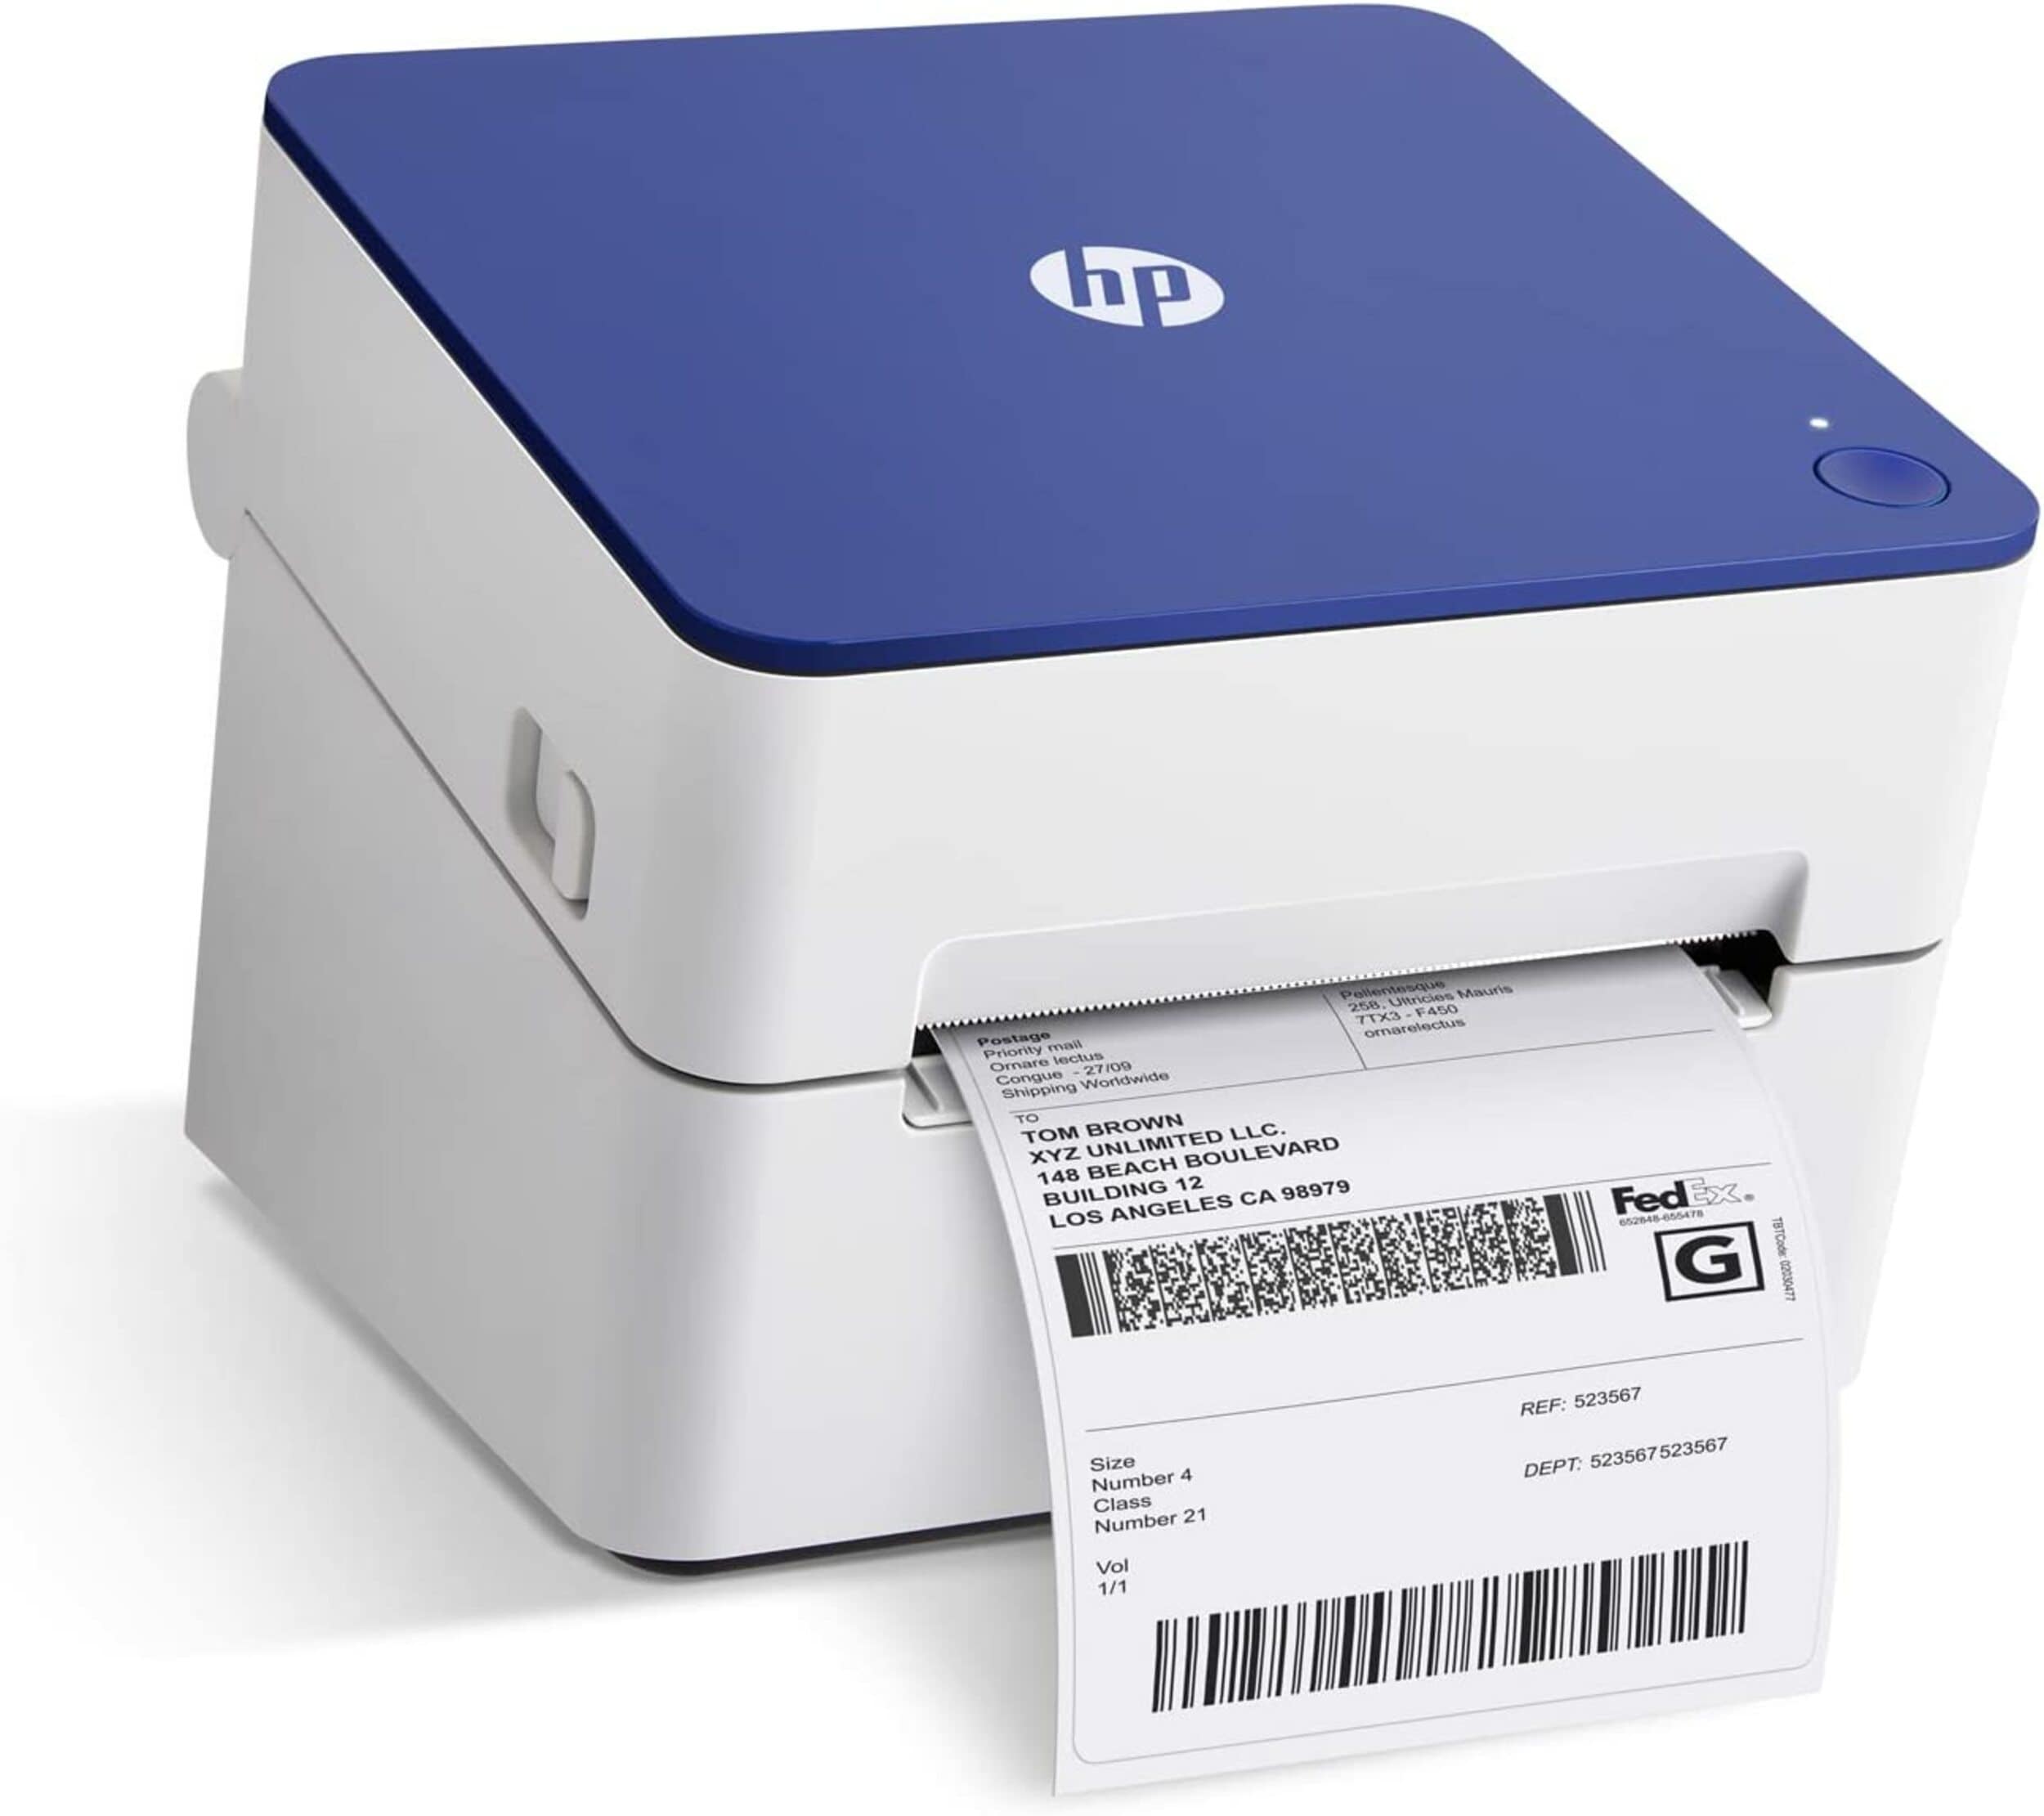 HP Shipping Label Printer, 4X6 Thermal Label Printer, 300 Dpi Printer For Home Office in the department at Lowes.com